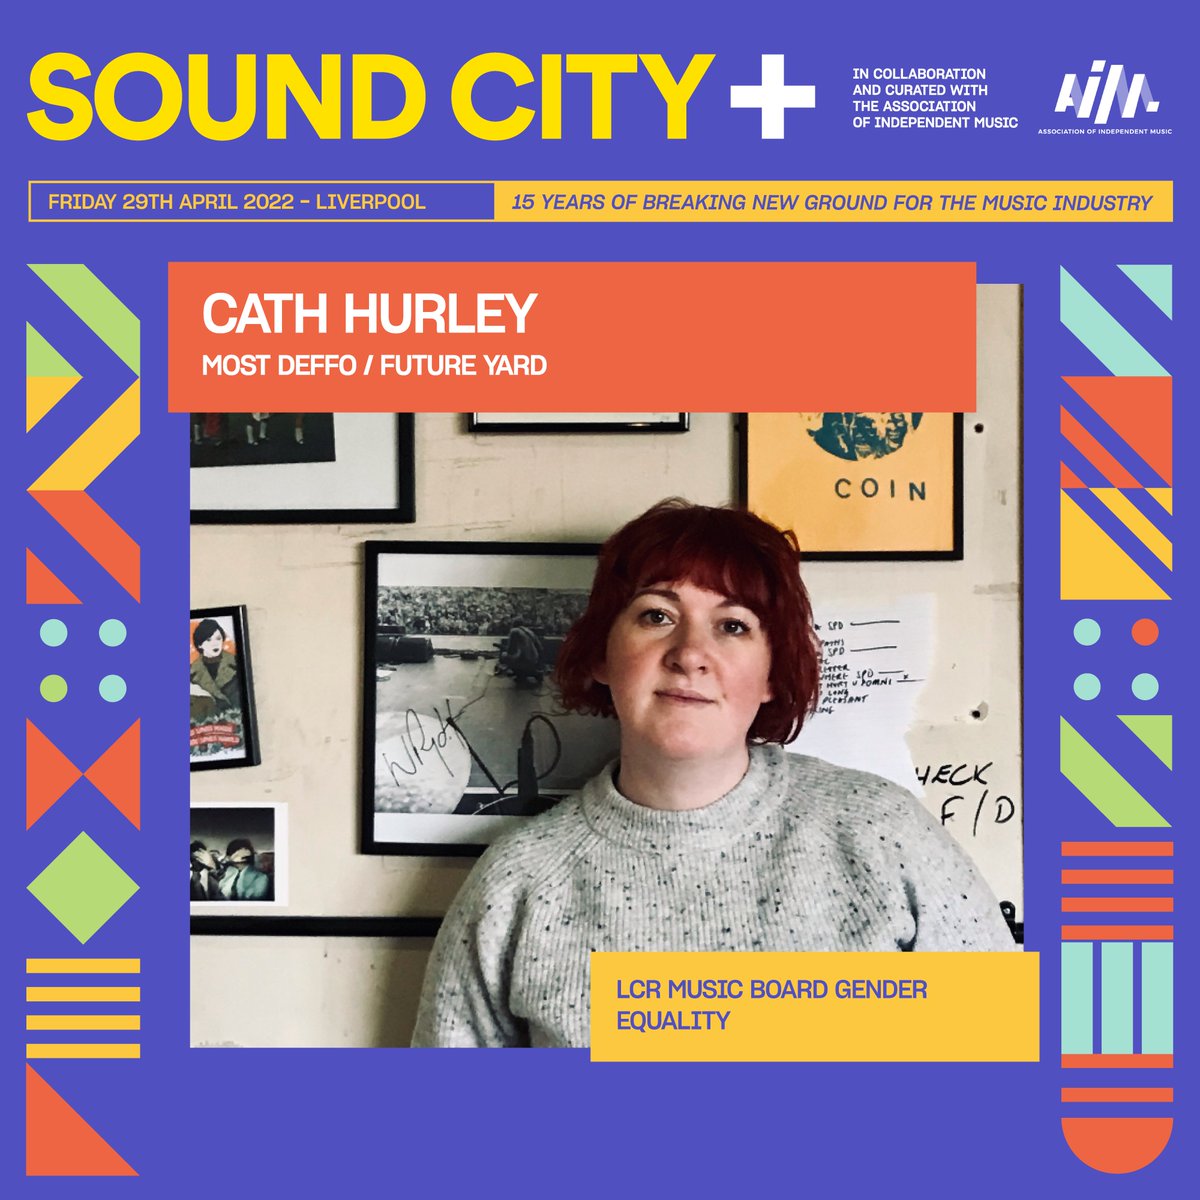 Taking part in a panel tomorrow at @SoundCityPlus representing the Gender Equality Subgroup of the @LCRMusicBoard with @Beckoir, @GraceGoodwin20  and @kevmcmanus7 - 11:30am at @LEAFonBoldSt.

Come say 'ello. Here's a picture of me to prove it's happening.